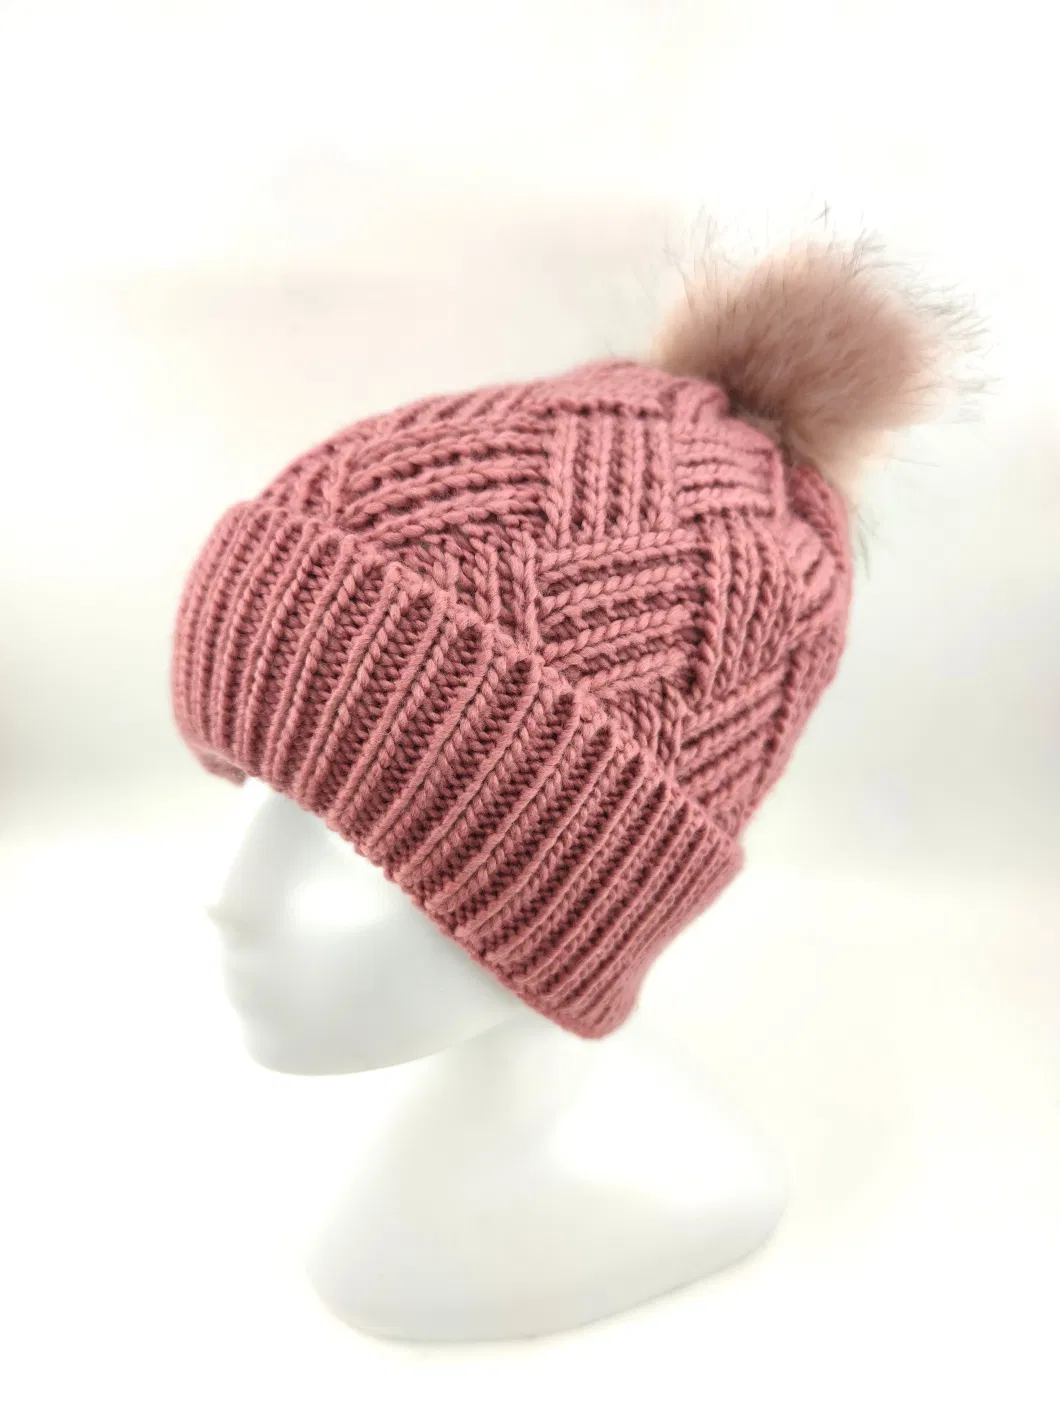 Acrylic Icelandic Yarn Jacquard Knitted Hat Turn up The Cuff with Fake Fur Pompon on Top